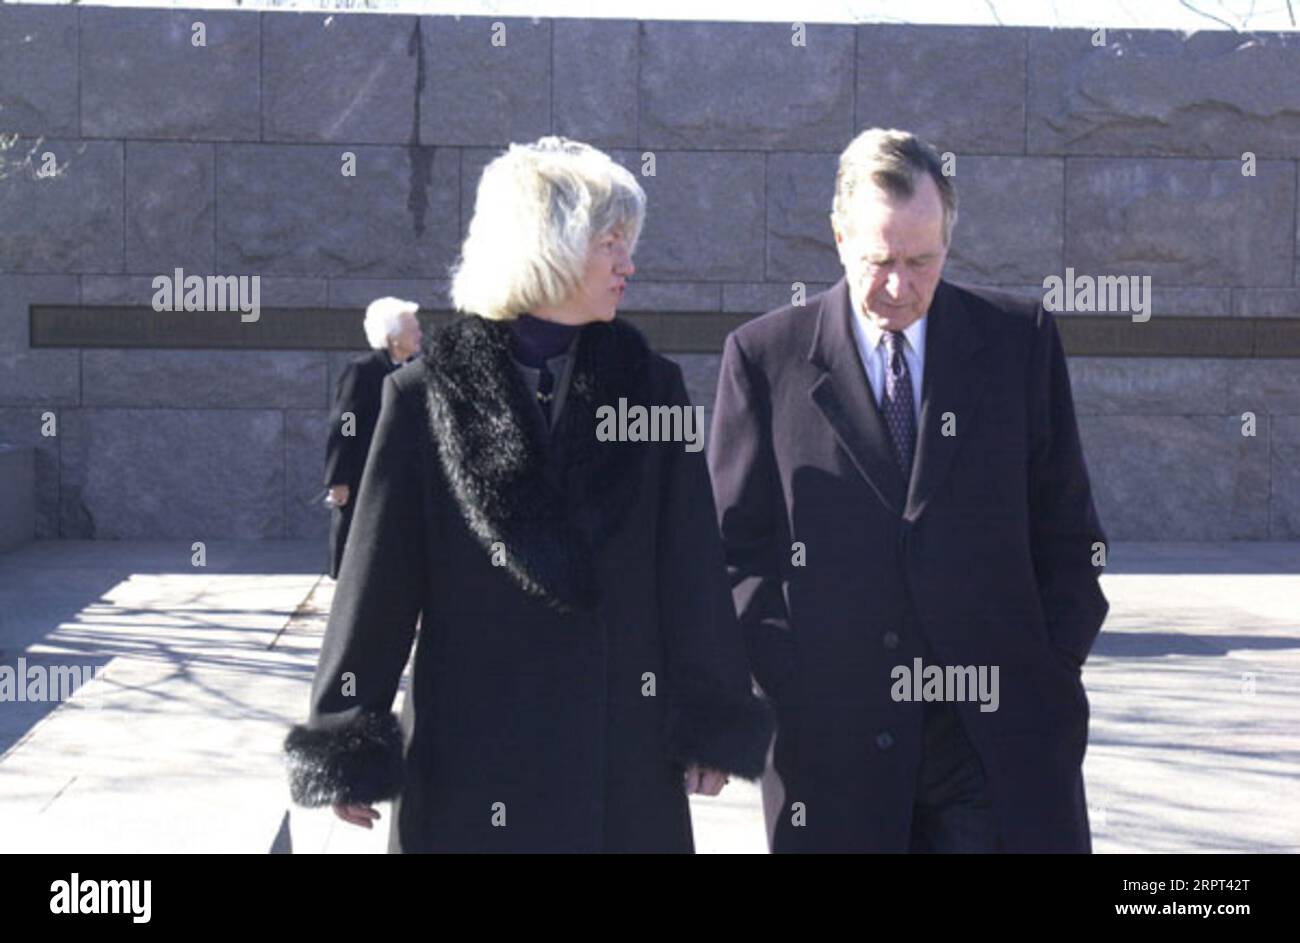 Secretary Gale Norton, left, with former President George H.W. Bush after inspecting statue of Franklin Delano Roosevelt in wheelchair, during visit to the Franklin Delano Roosevelt Memorial, Washington, D.C., for ceremonial unveiling of dedication panel for the statue Stock Photo